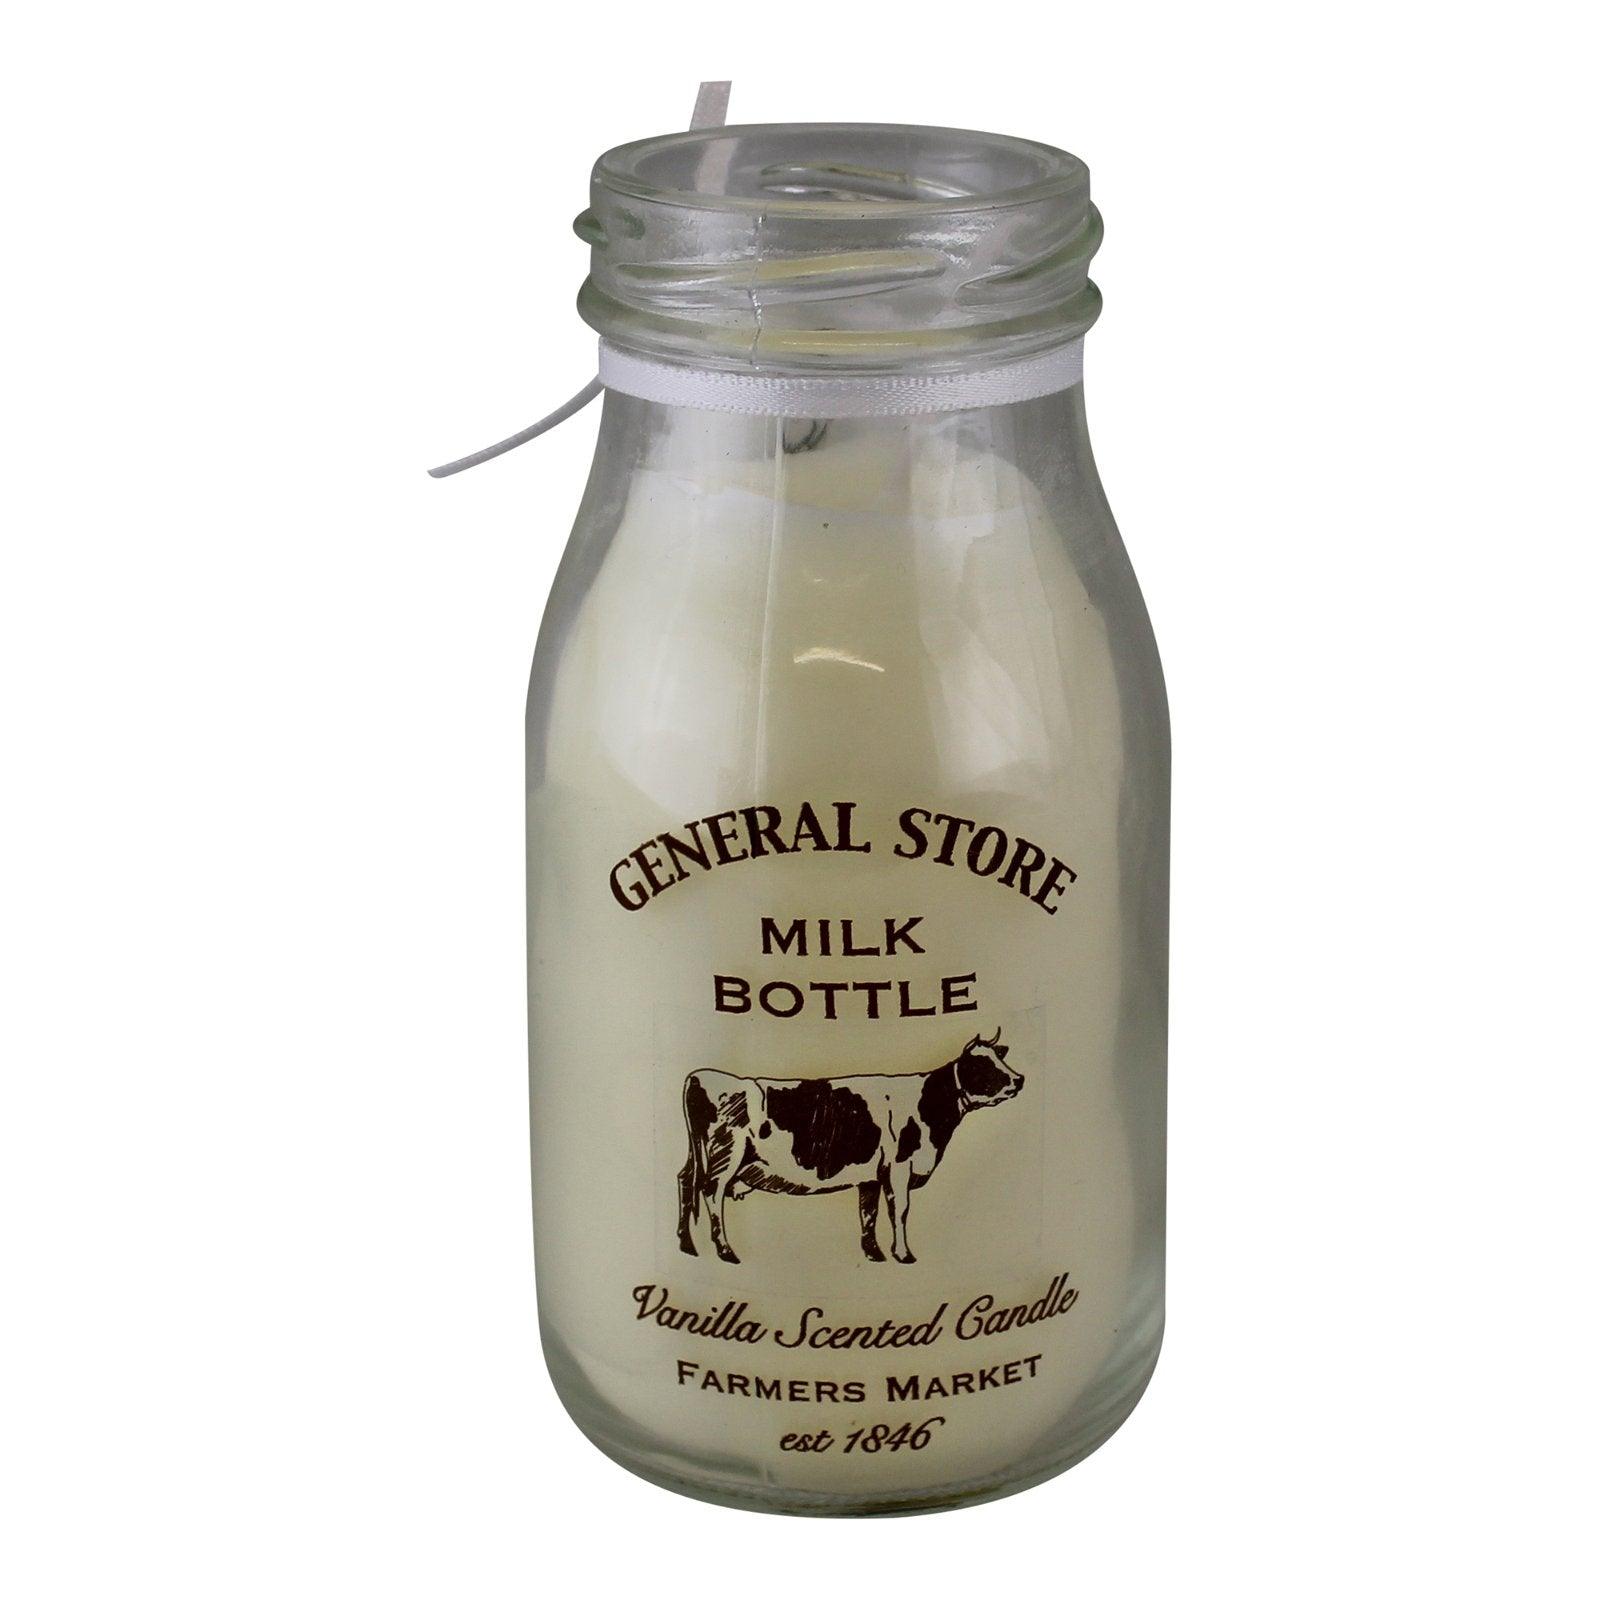 View Vanilla Scented Milk Bottle Candle information